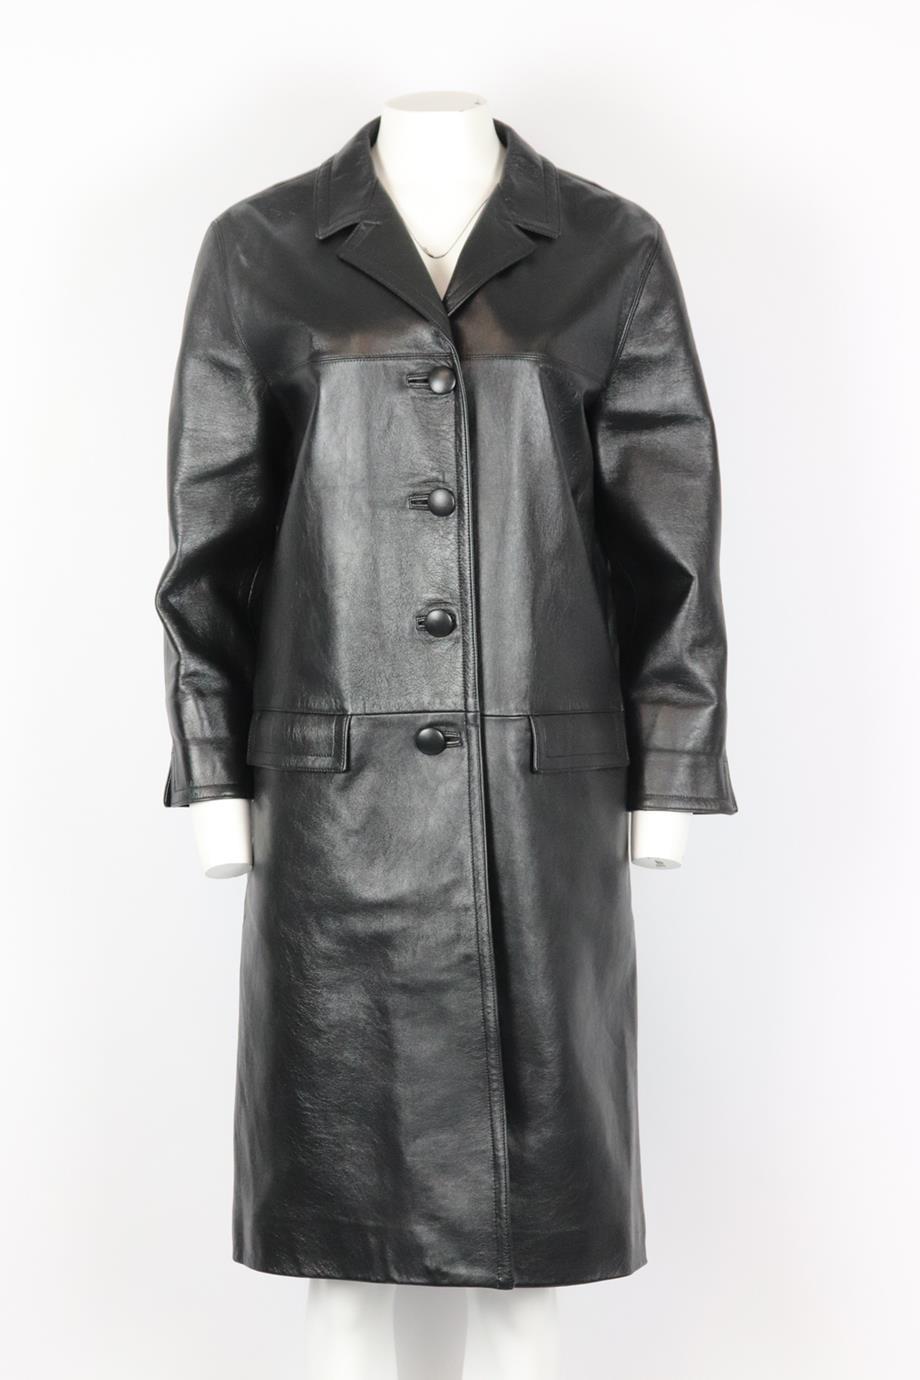 Prada leather coat. Black. Long sleeve, v-neck. Button fastening at front. 100% Lambskin; lining: 100% viscose. Size: IT 44 (UK 12, US 8, FR 40). Shoulder to shoulder: 17 in. Bust: 38 in. Waist: 44 in. Hips: 47 in. Length: 40.5 in. Very good